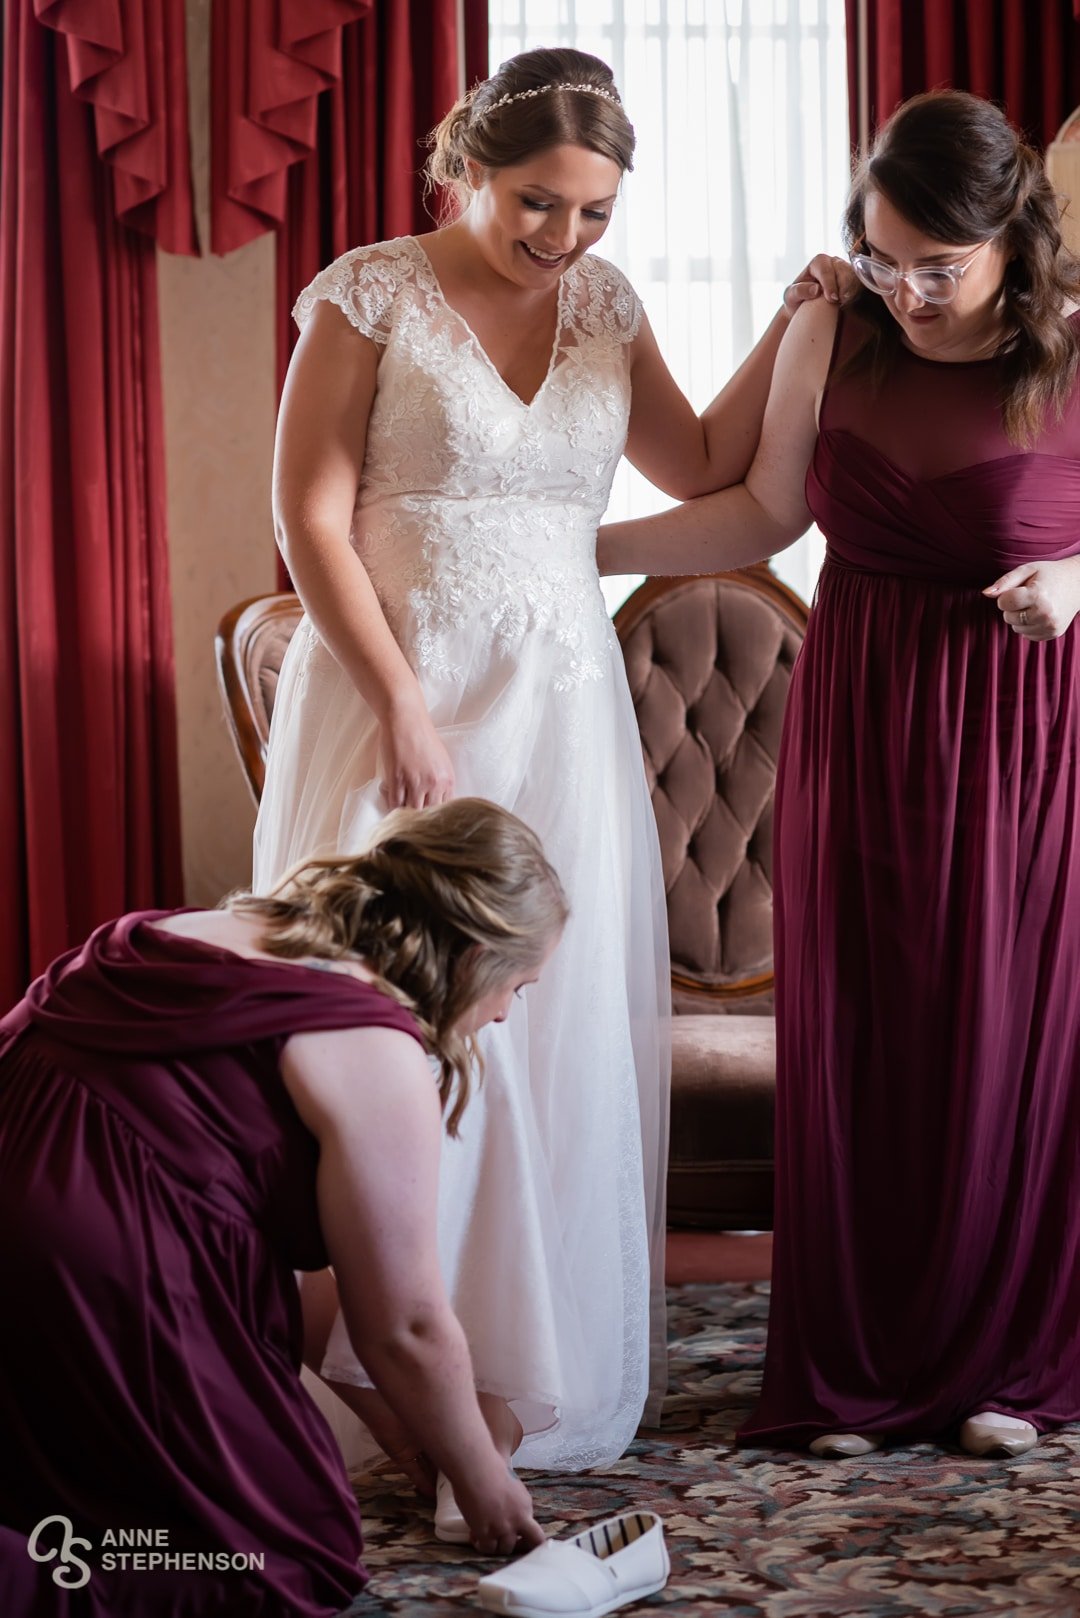 The bride is assisted into her shoes with the help of her attendants.